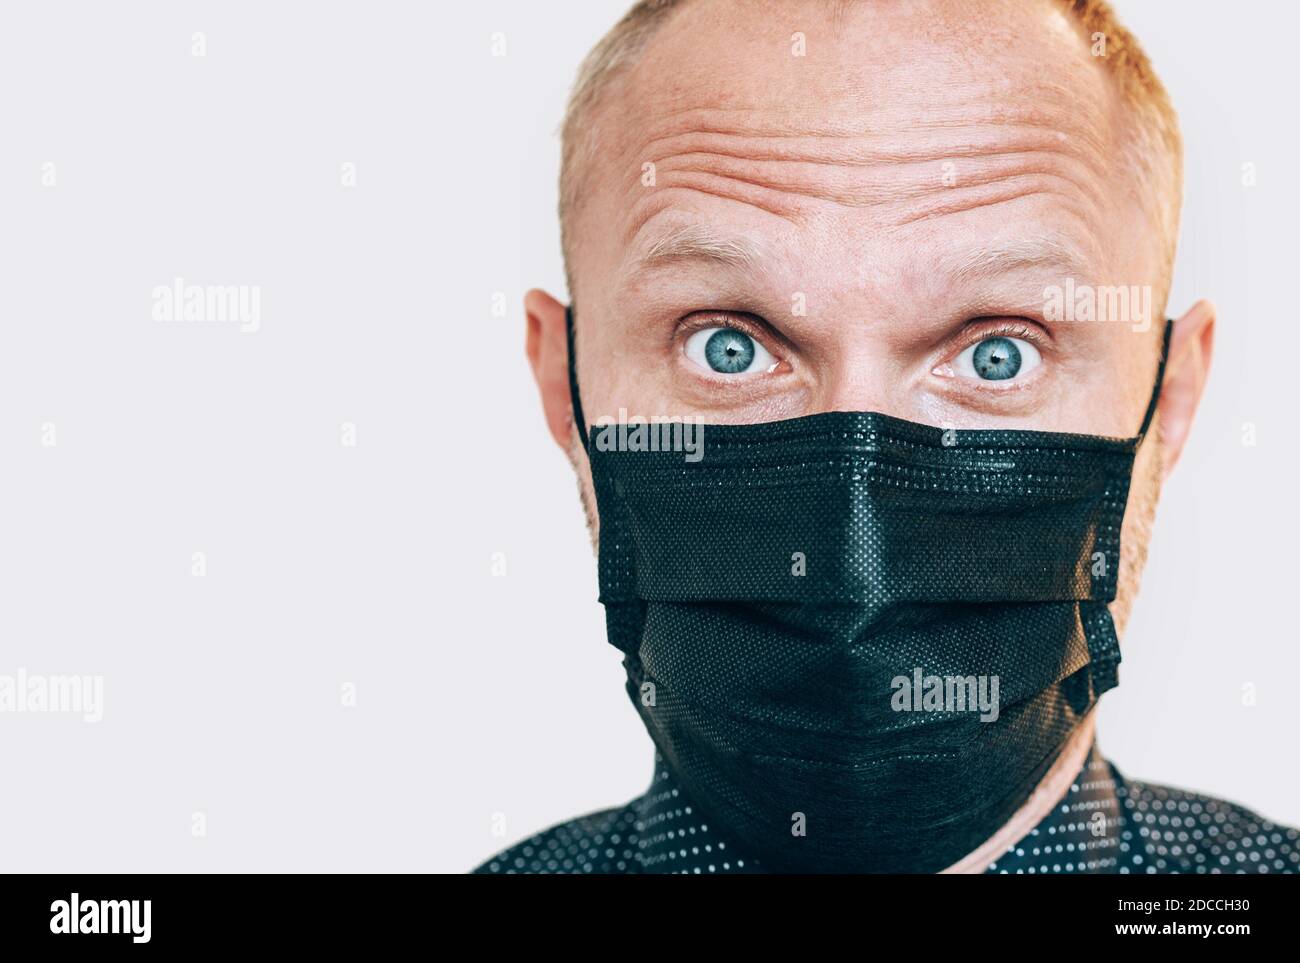 Portrait of surprised man in black facial mask during a COVID-19 world pandemic looking at camera. Self-protection and stop virus spreading measures c Stock Photo